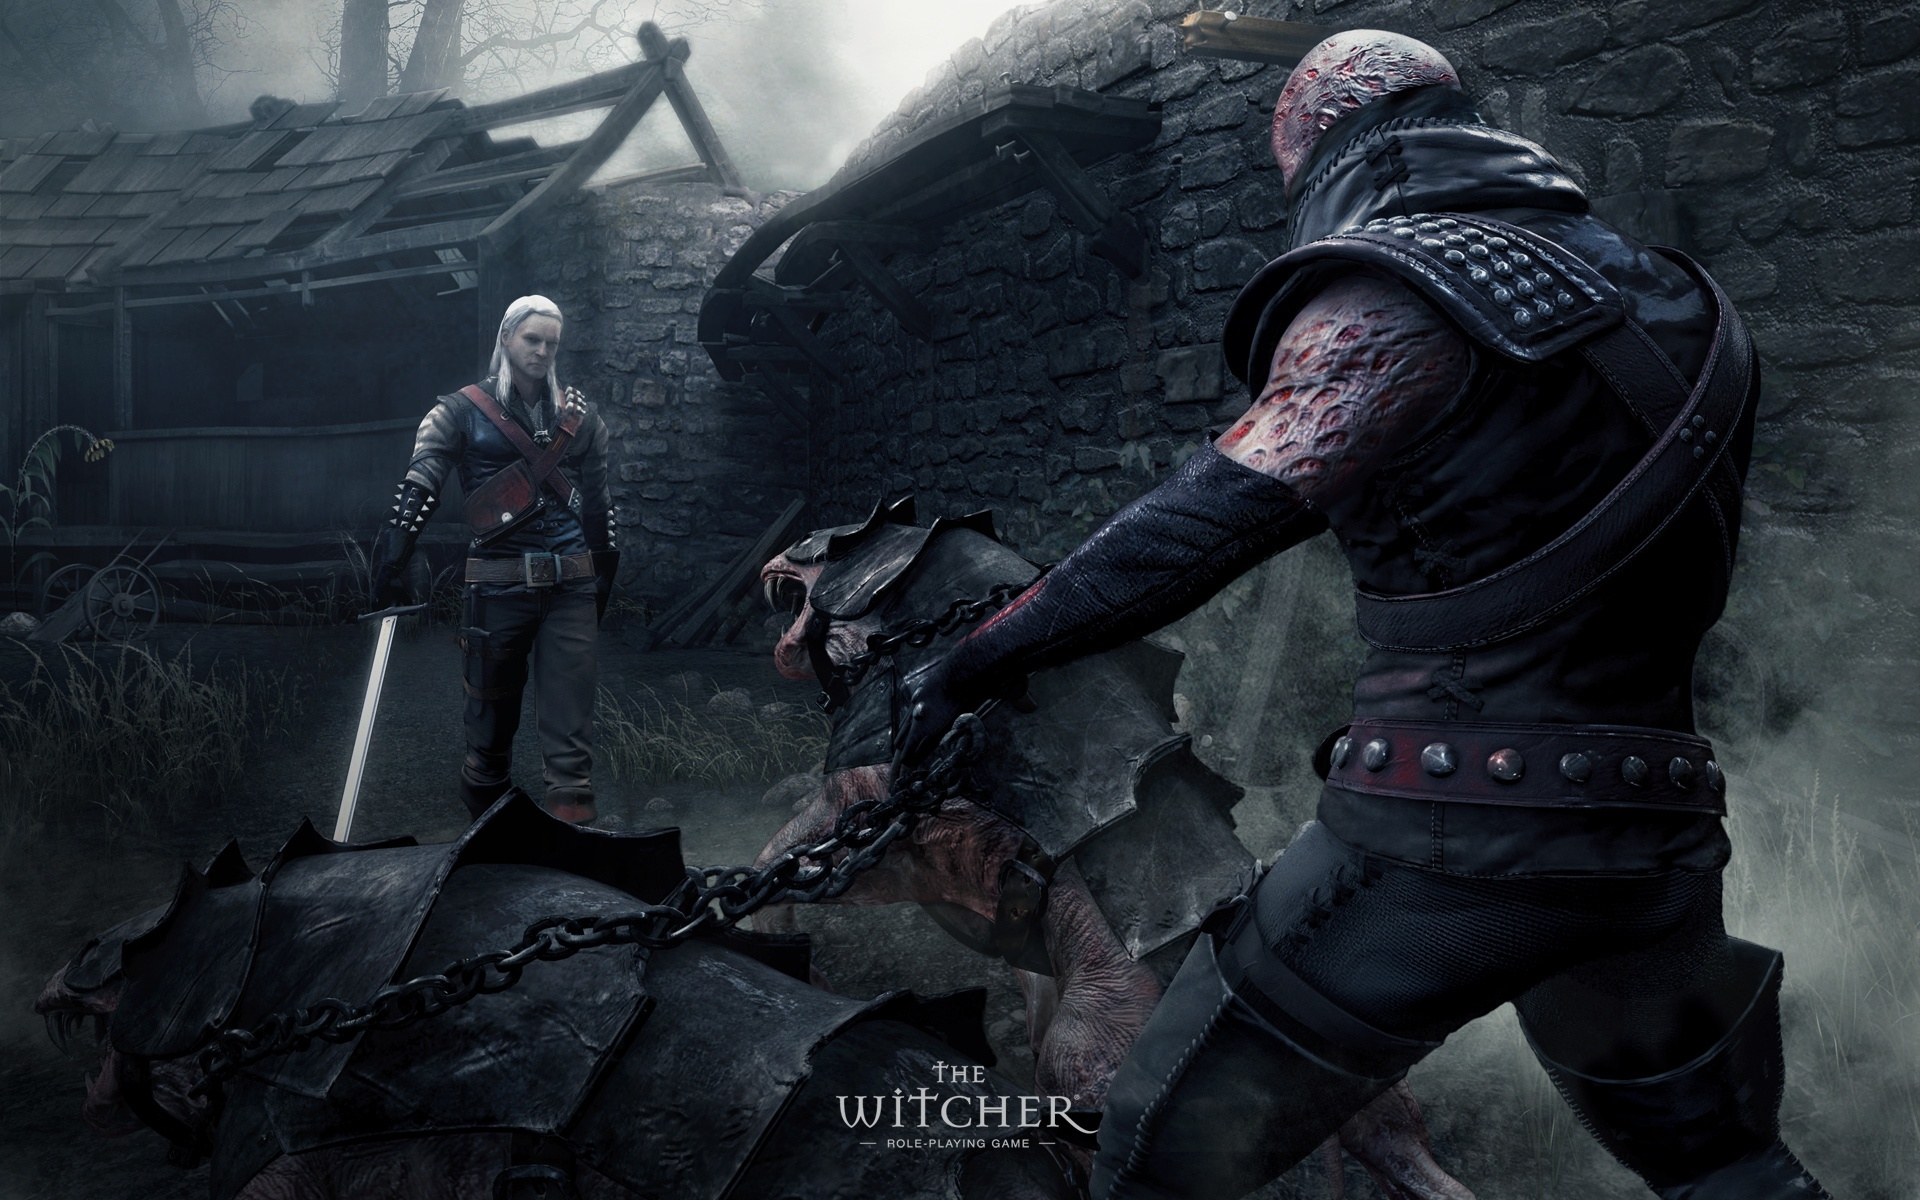 The Witcher   The Witcher Wallpaper 29331452 1920x1200